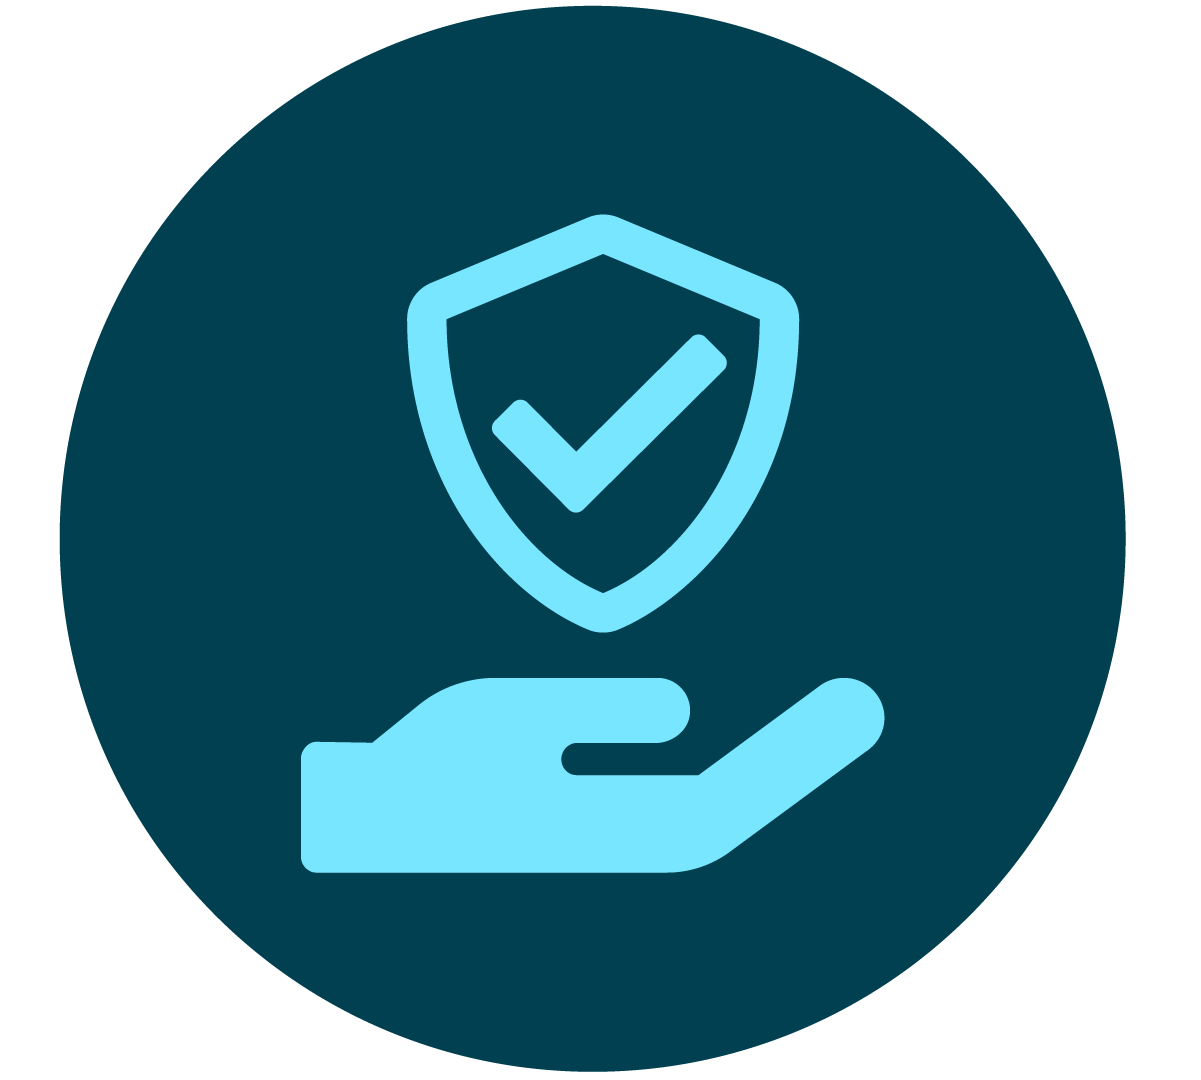 Decorative image: Icon with hand holding a shield with a tick on it – representing security and protection, and hsowing it's in the hands of the employees